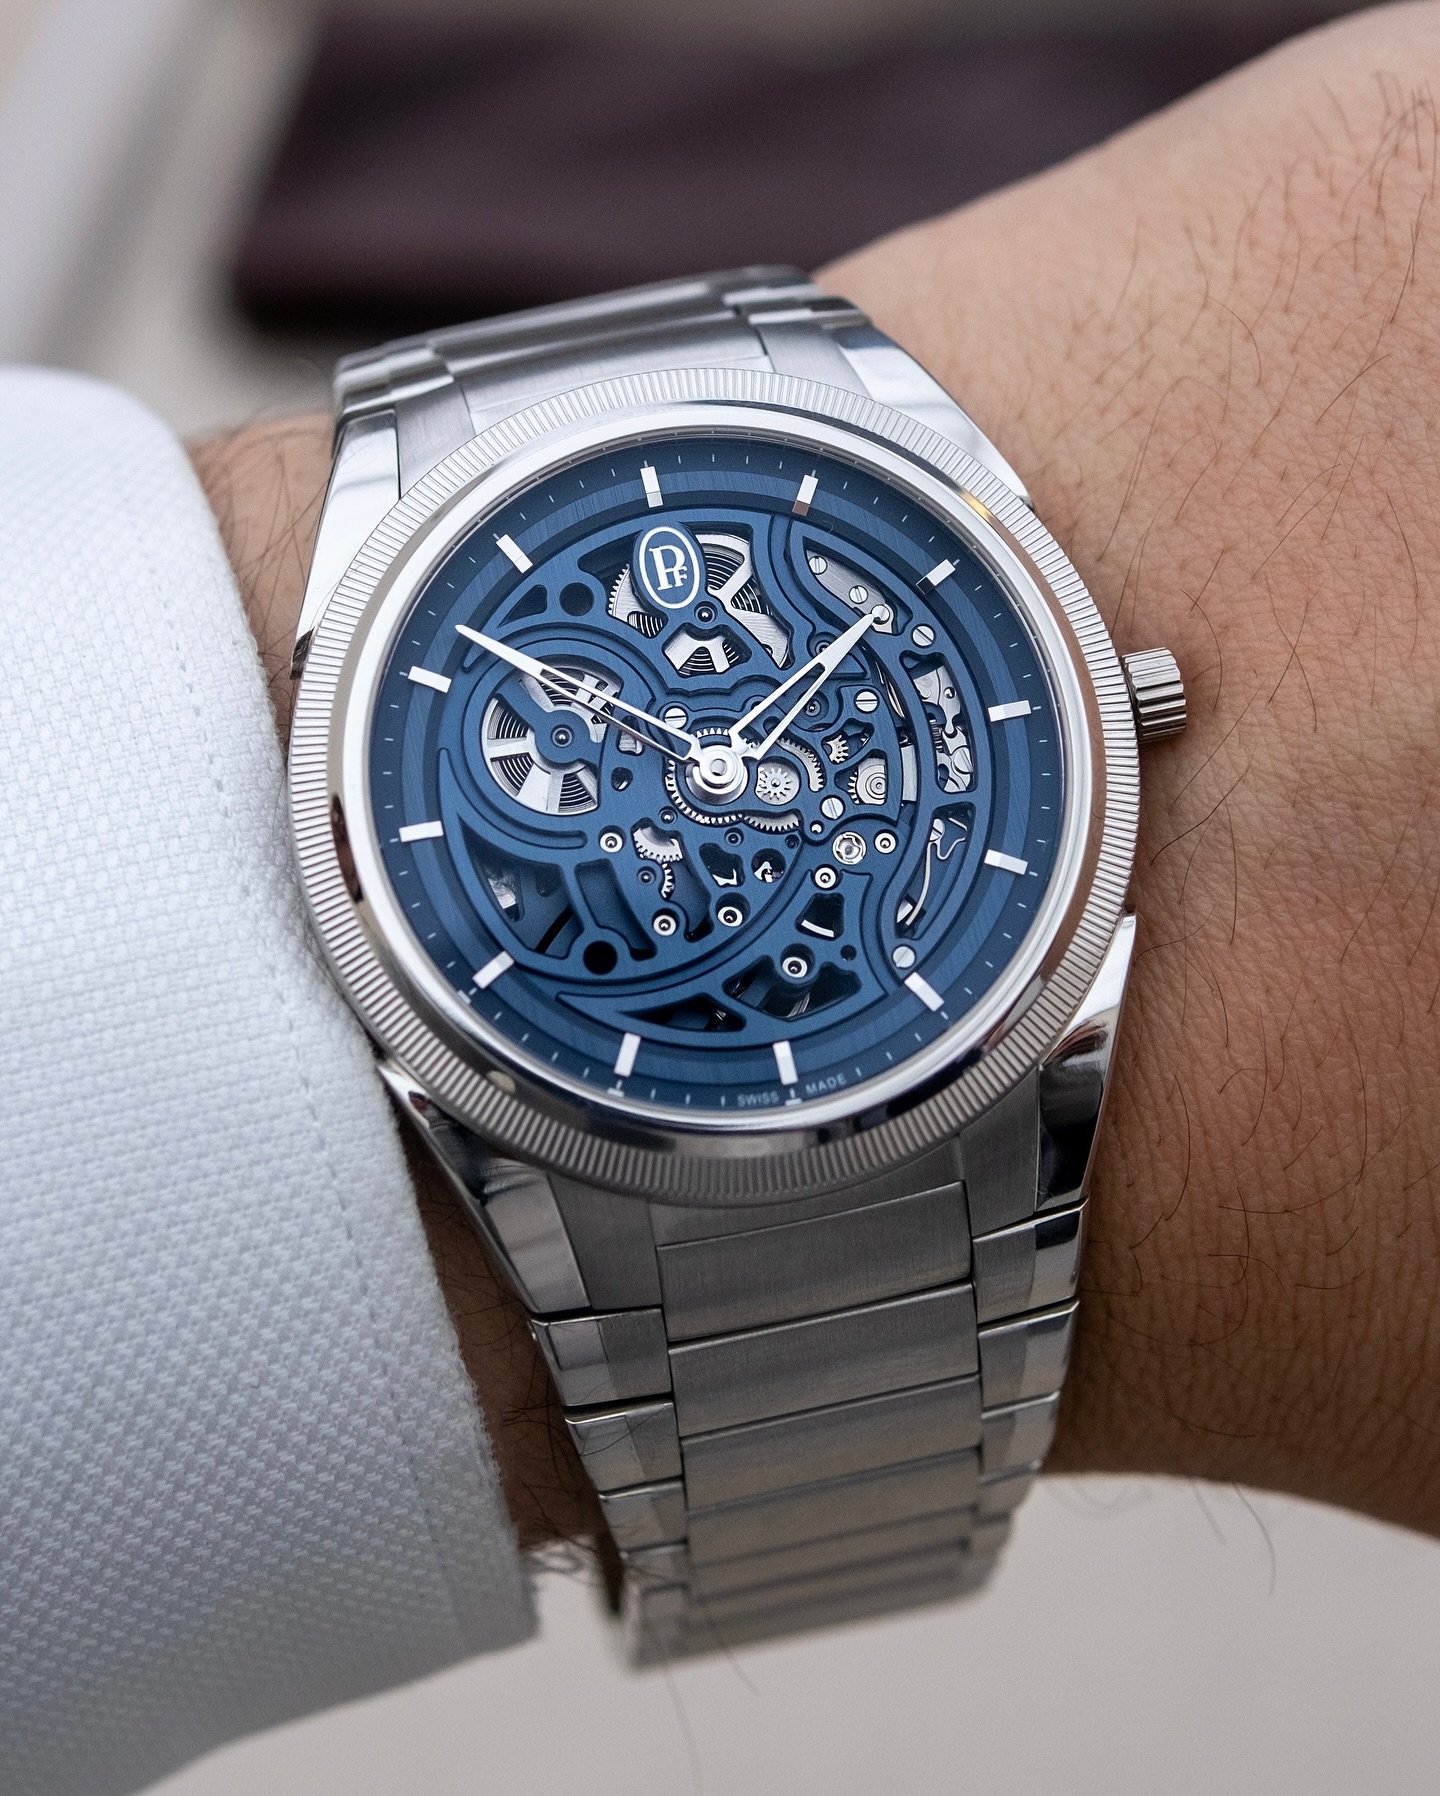 One of my favorite pieces from Watches &amp; Wonders was the @parmigianifleurier Tonda PF Skeleton in platinum. Though the design is not new, the combination of platinum case and bracelet and blue openworked dial just works so well.